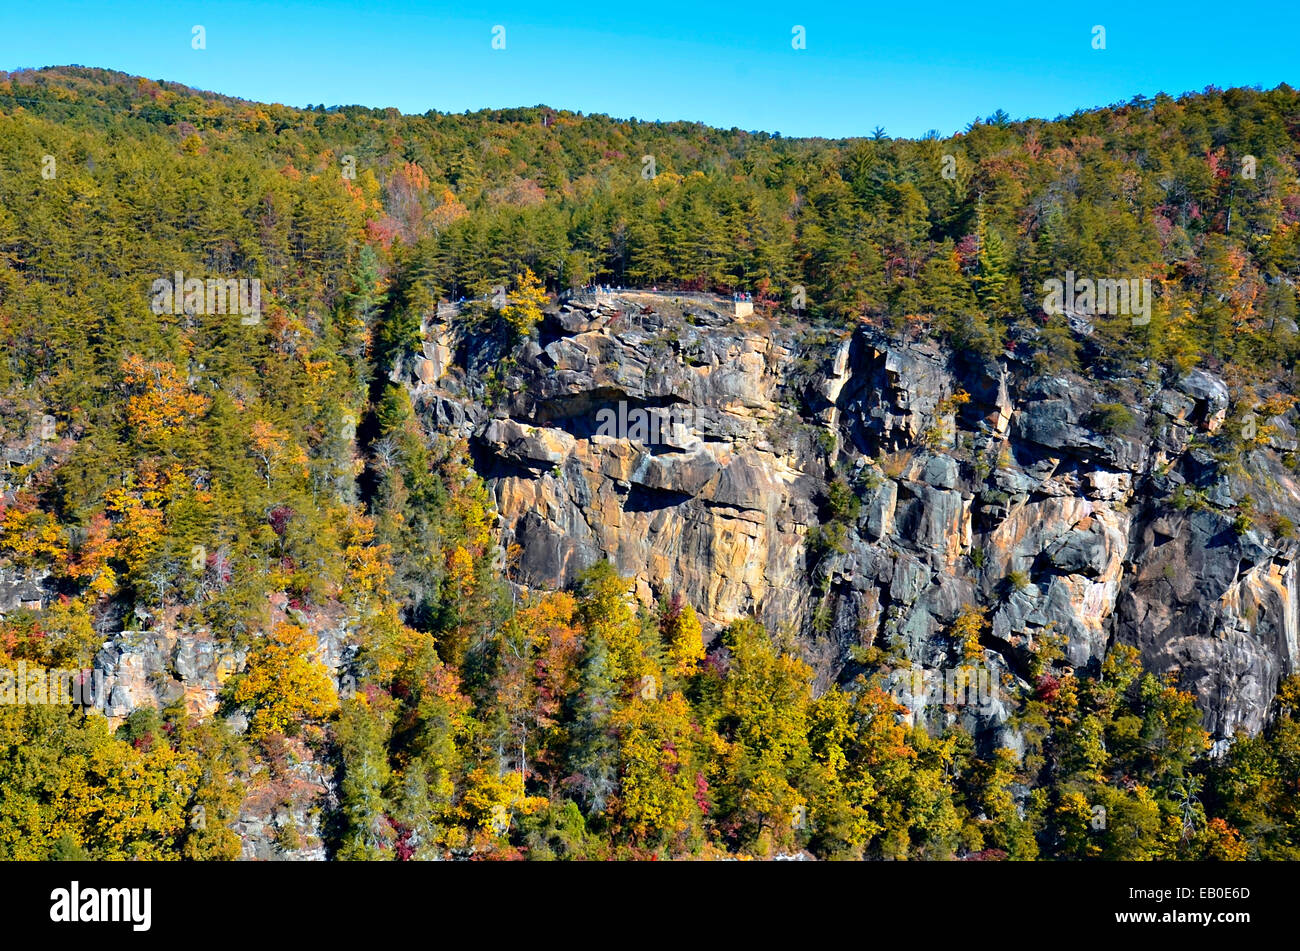 A rock overlook at the Tallulah Gorge in Georgia, a popular tourist attraction. Stock Photo